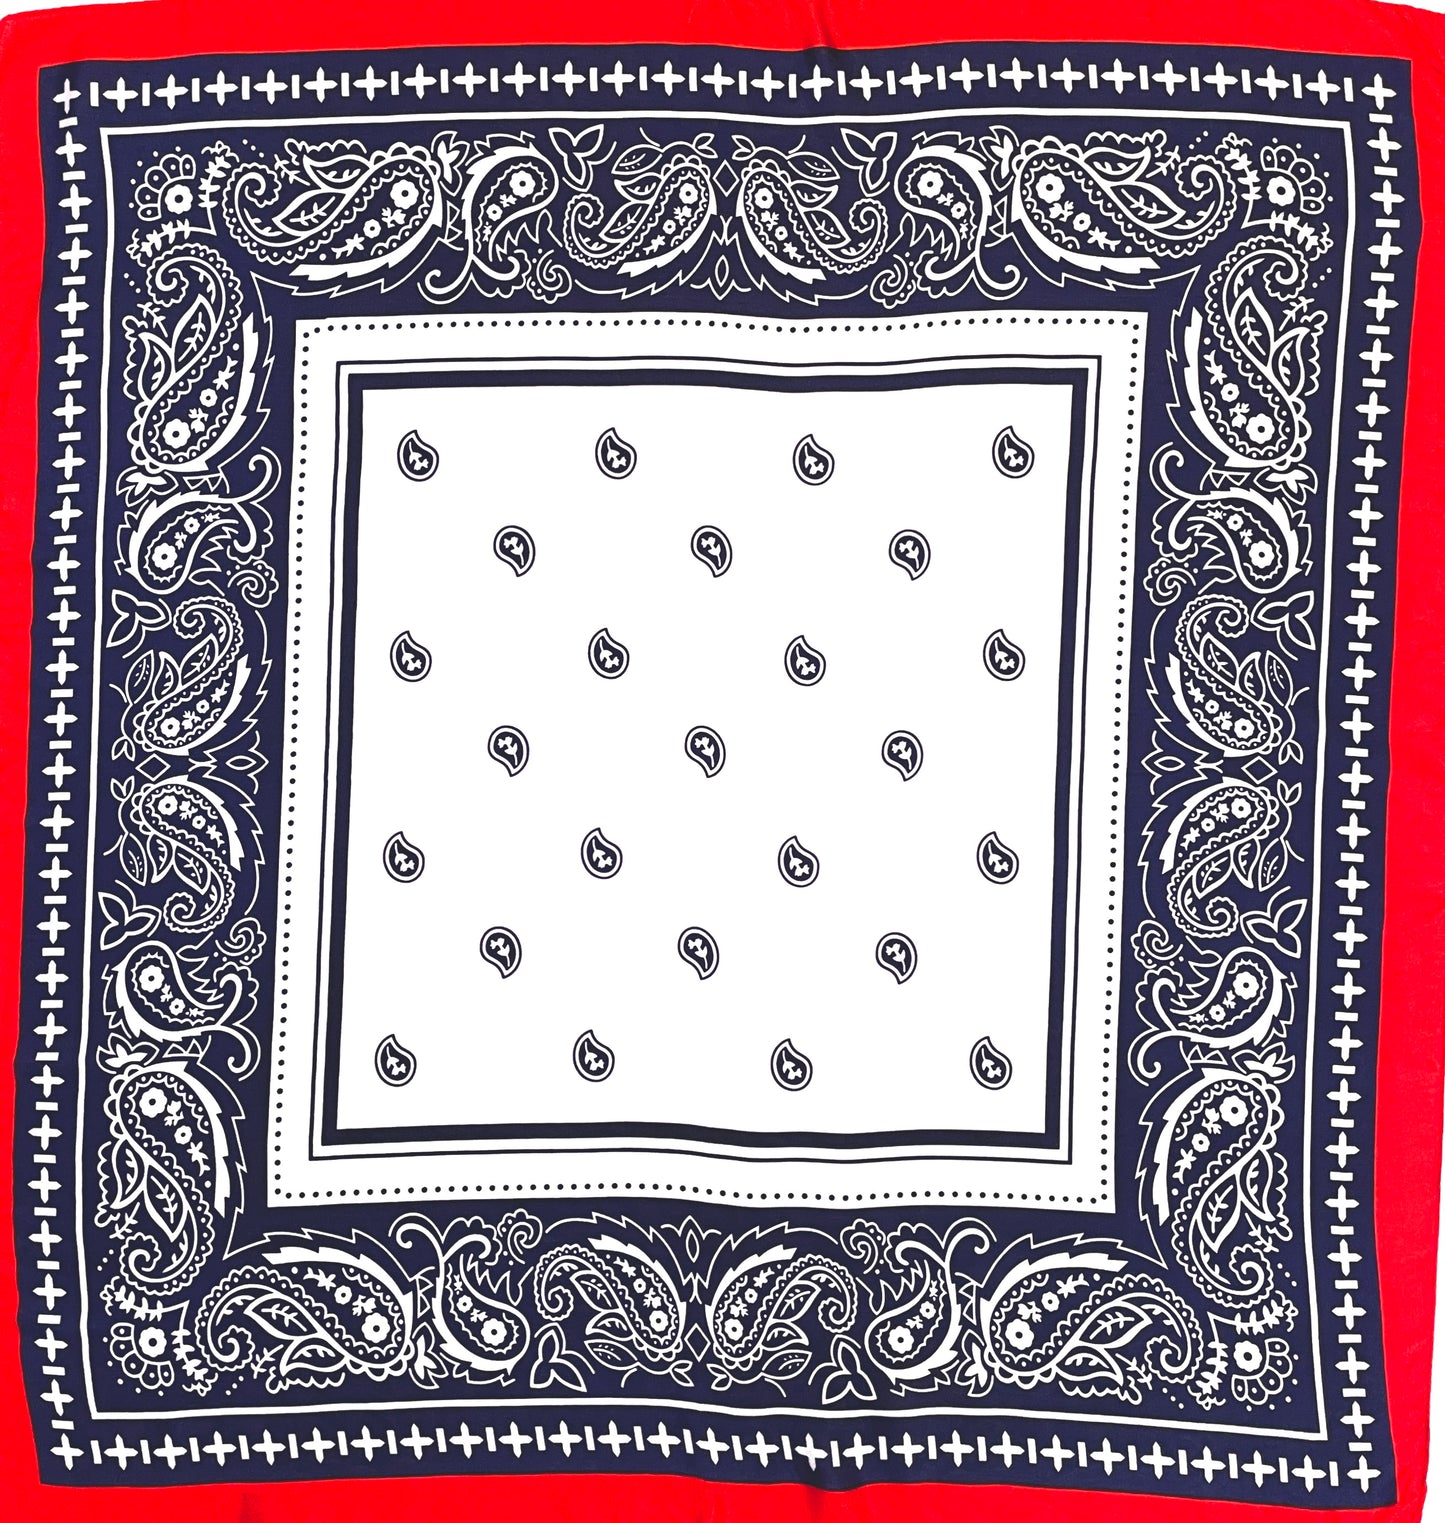 Red White and Blue Paisley Border Wild Rag